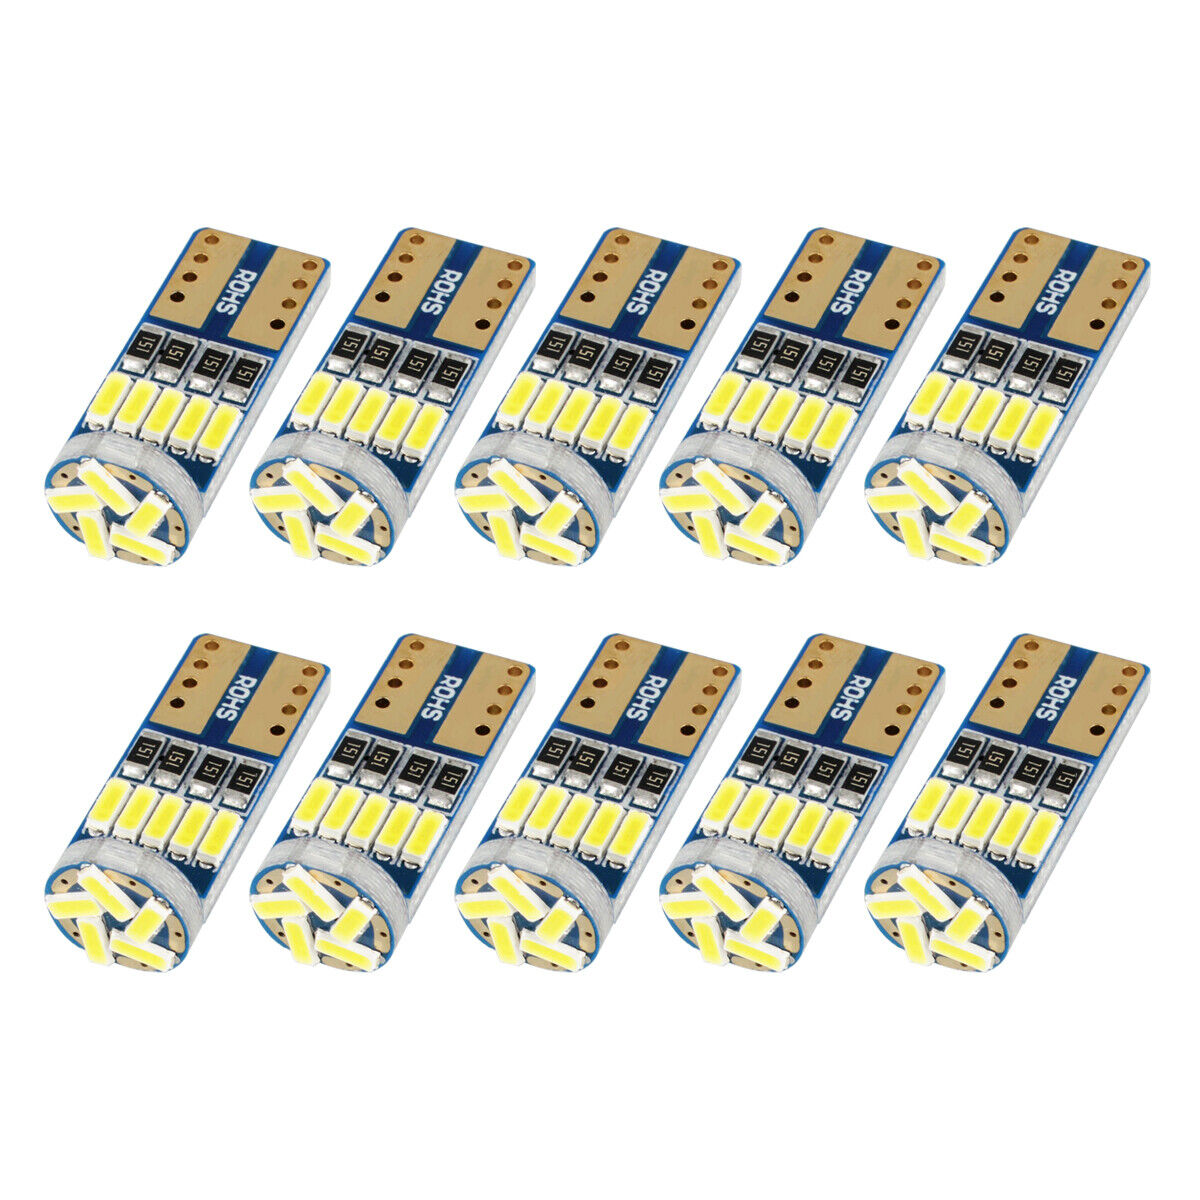 20 x T10 LED Canbus Error Free Bulb 15SMD 194 W5W Car Wedge Lamp Dome Map Light